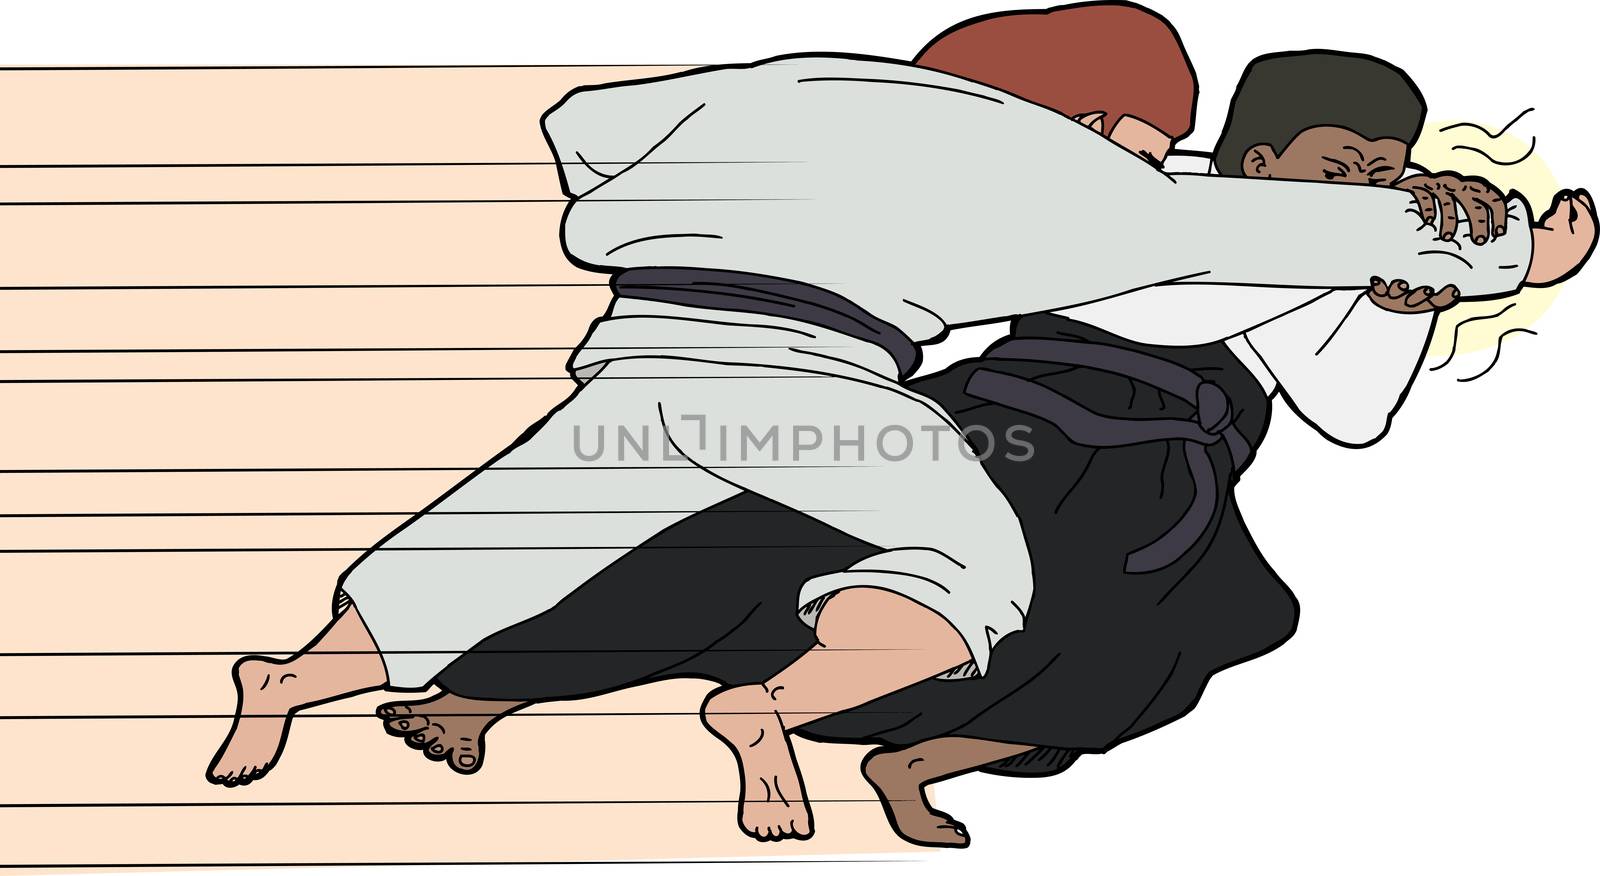 Aikido martial arts master throwing one opponent